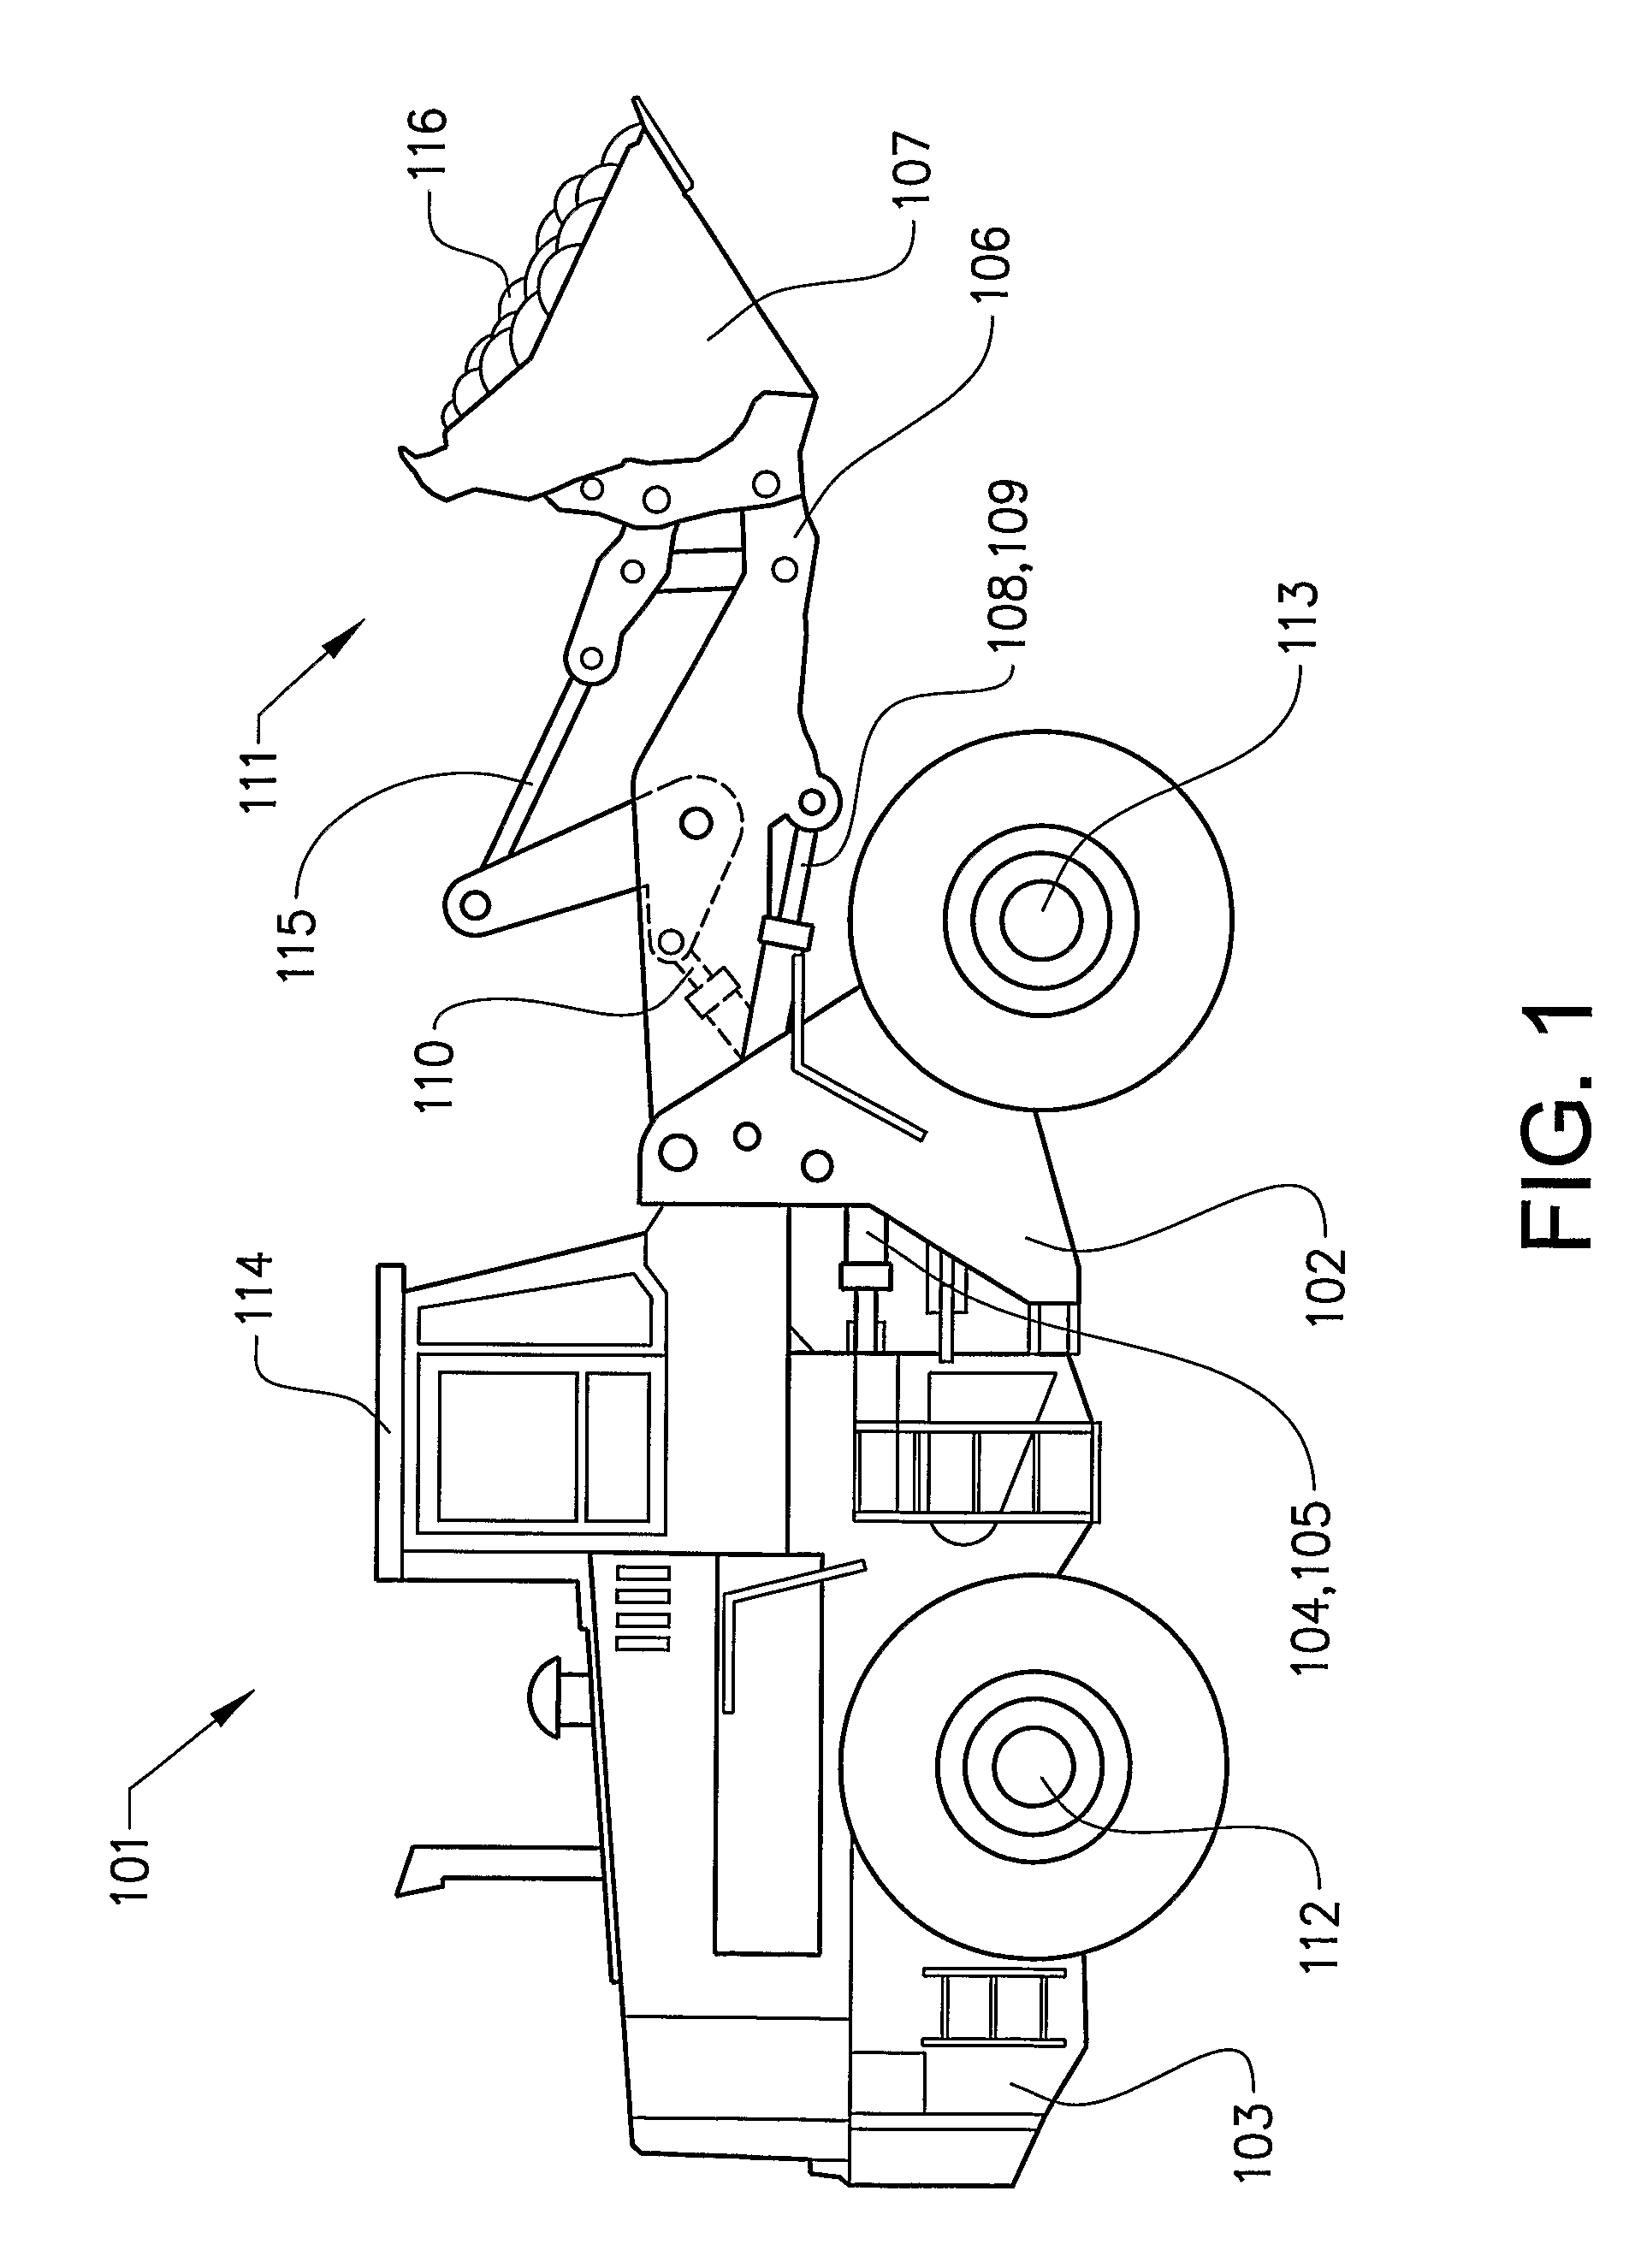 Method for controlling a movement of a vehicle component